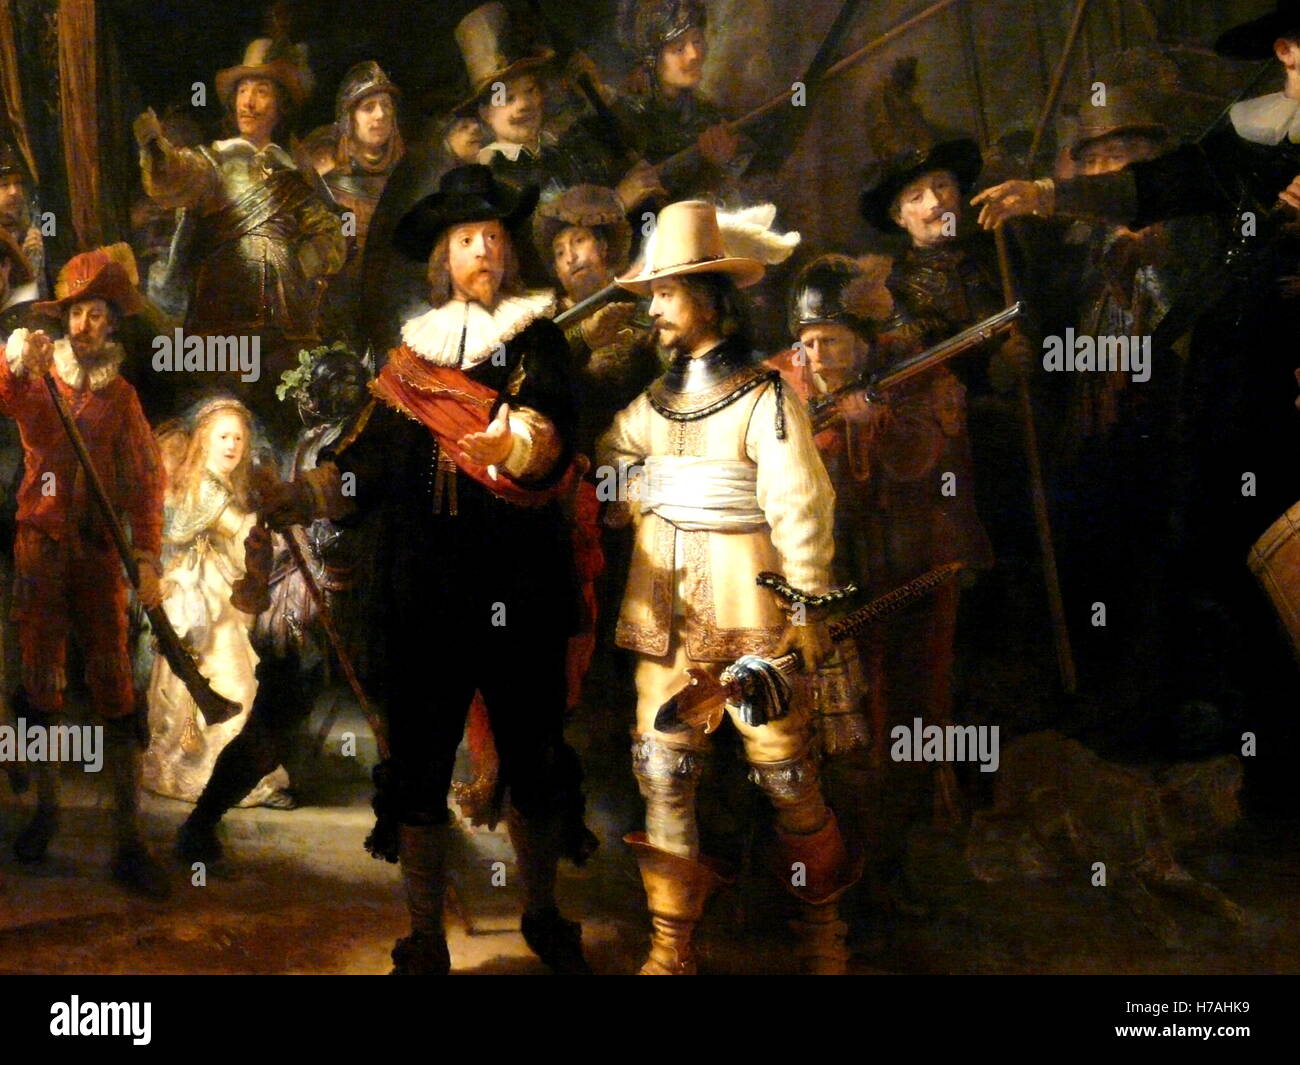 The Nightwatch by Rembrandt in the Rijksmuseum in Amsterdam, Holland. Stock Photo